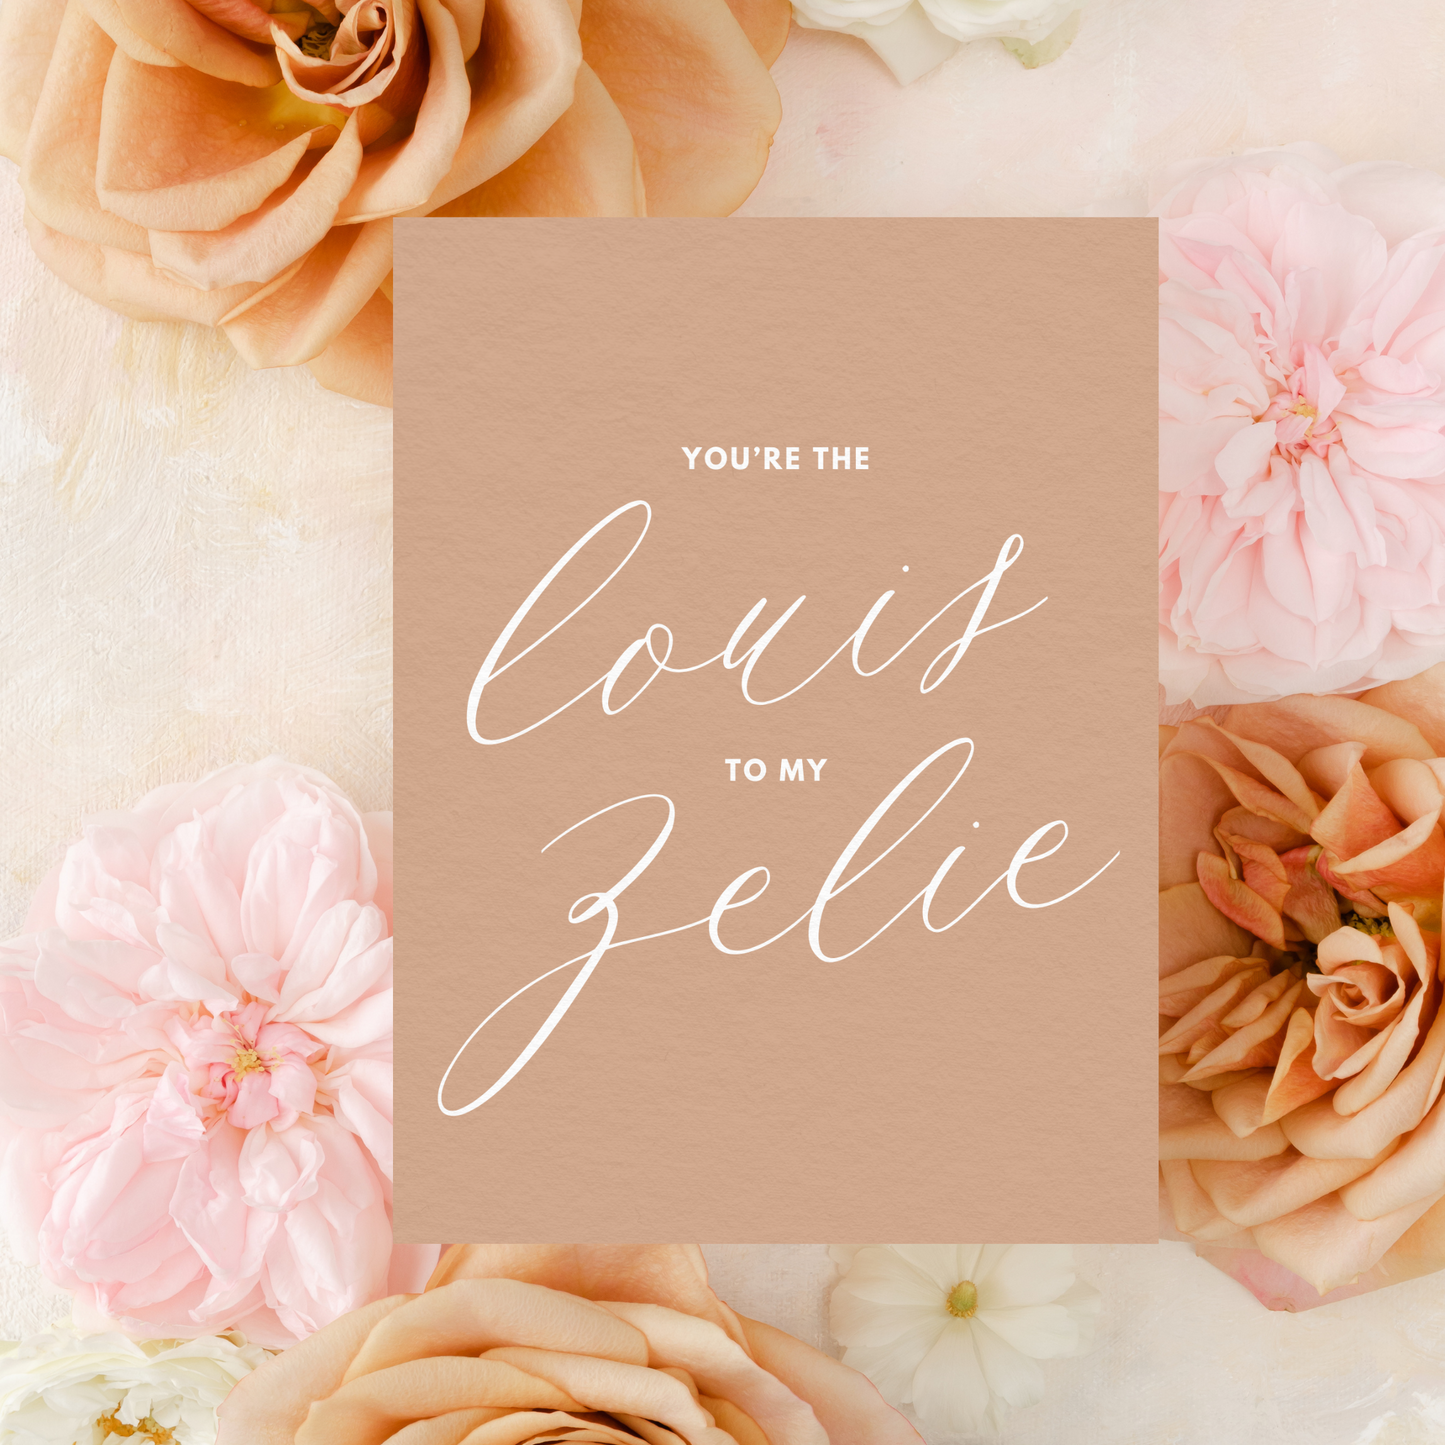 Catholic Valentine's Day Greeting Card, "You are the Louis to my Zelie"